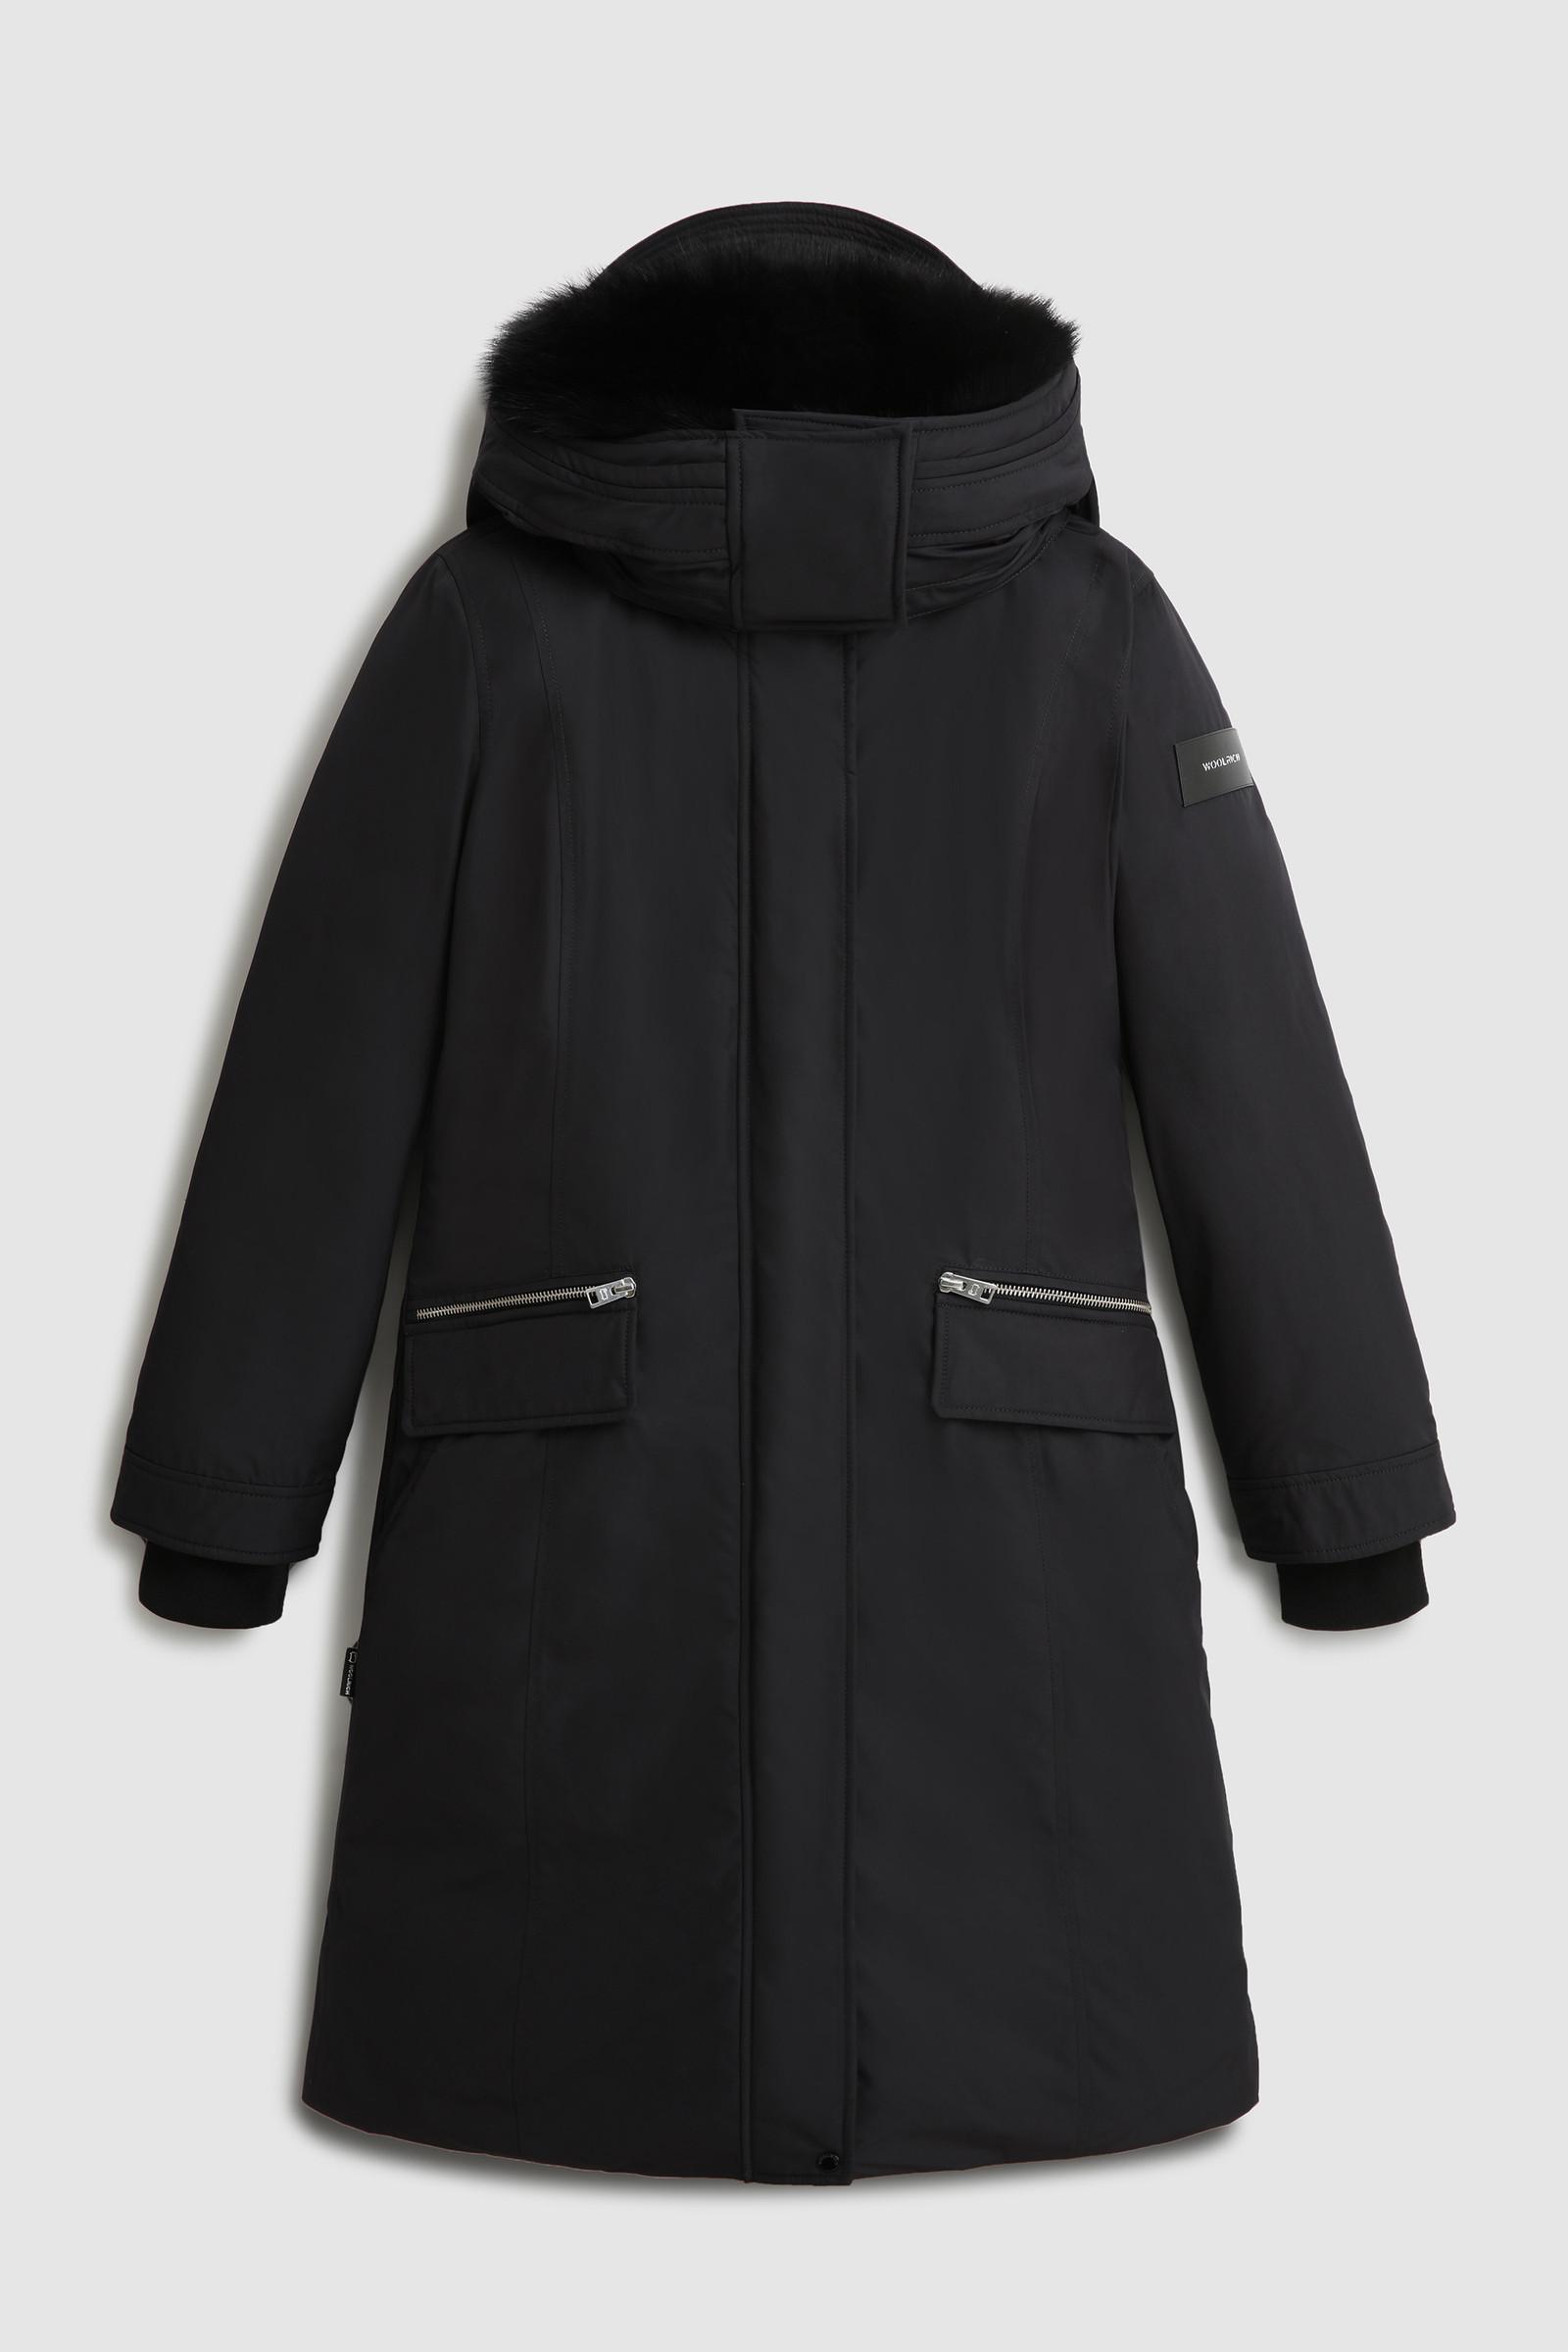 Woolrich Mahan Parka With Removable Hood in Black | Lyst